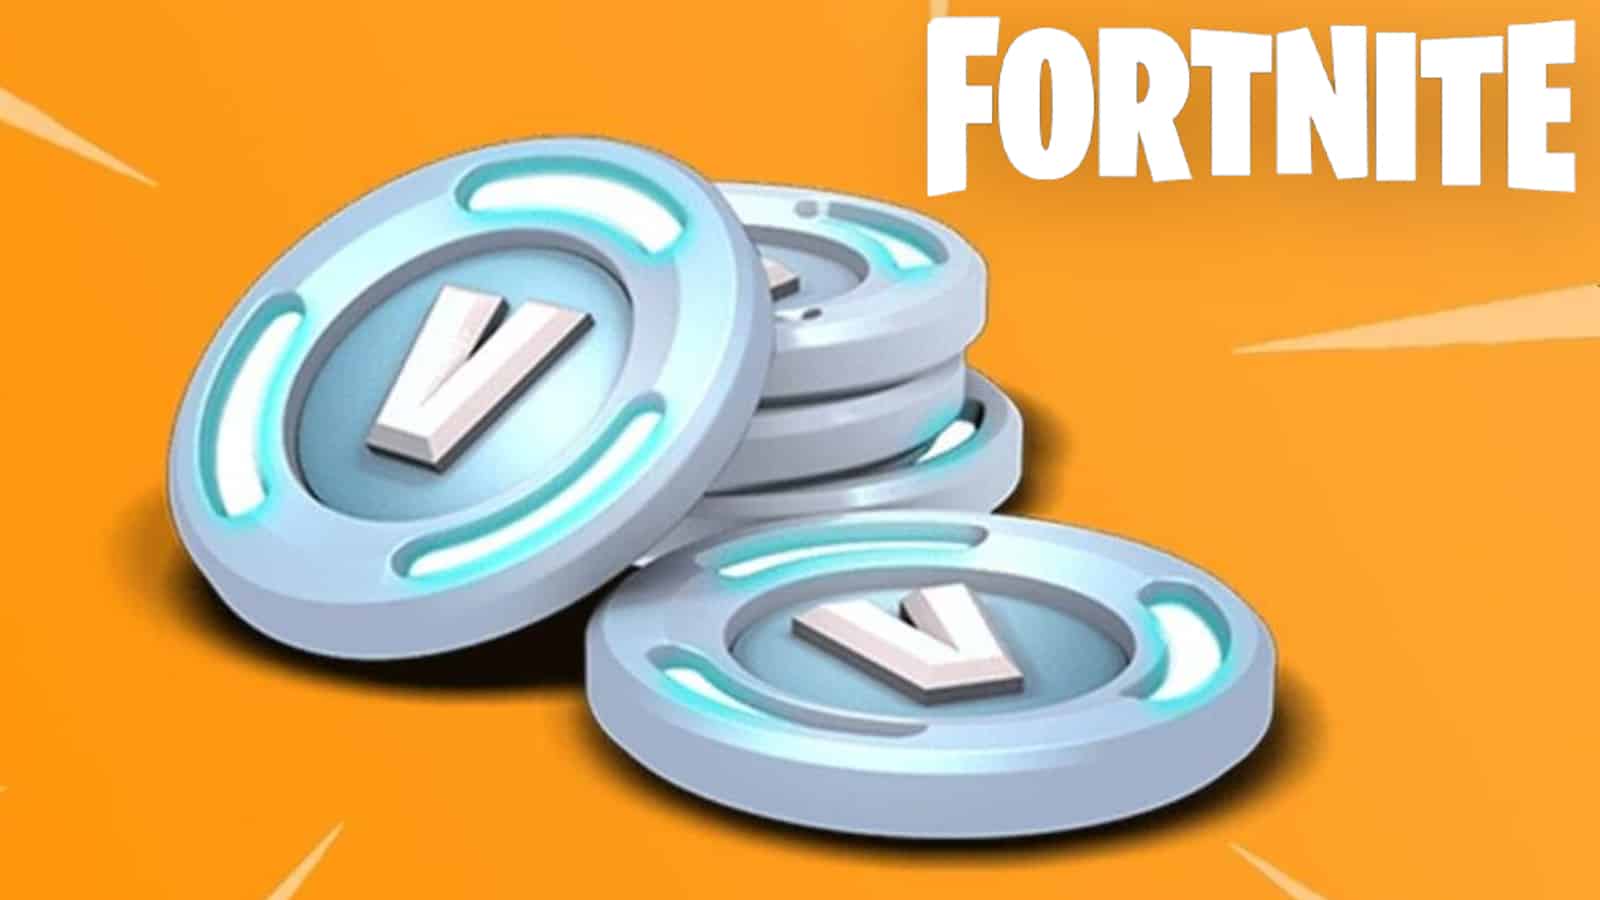 An image of V-Bucks in Fortnite with the logo in the top corner